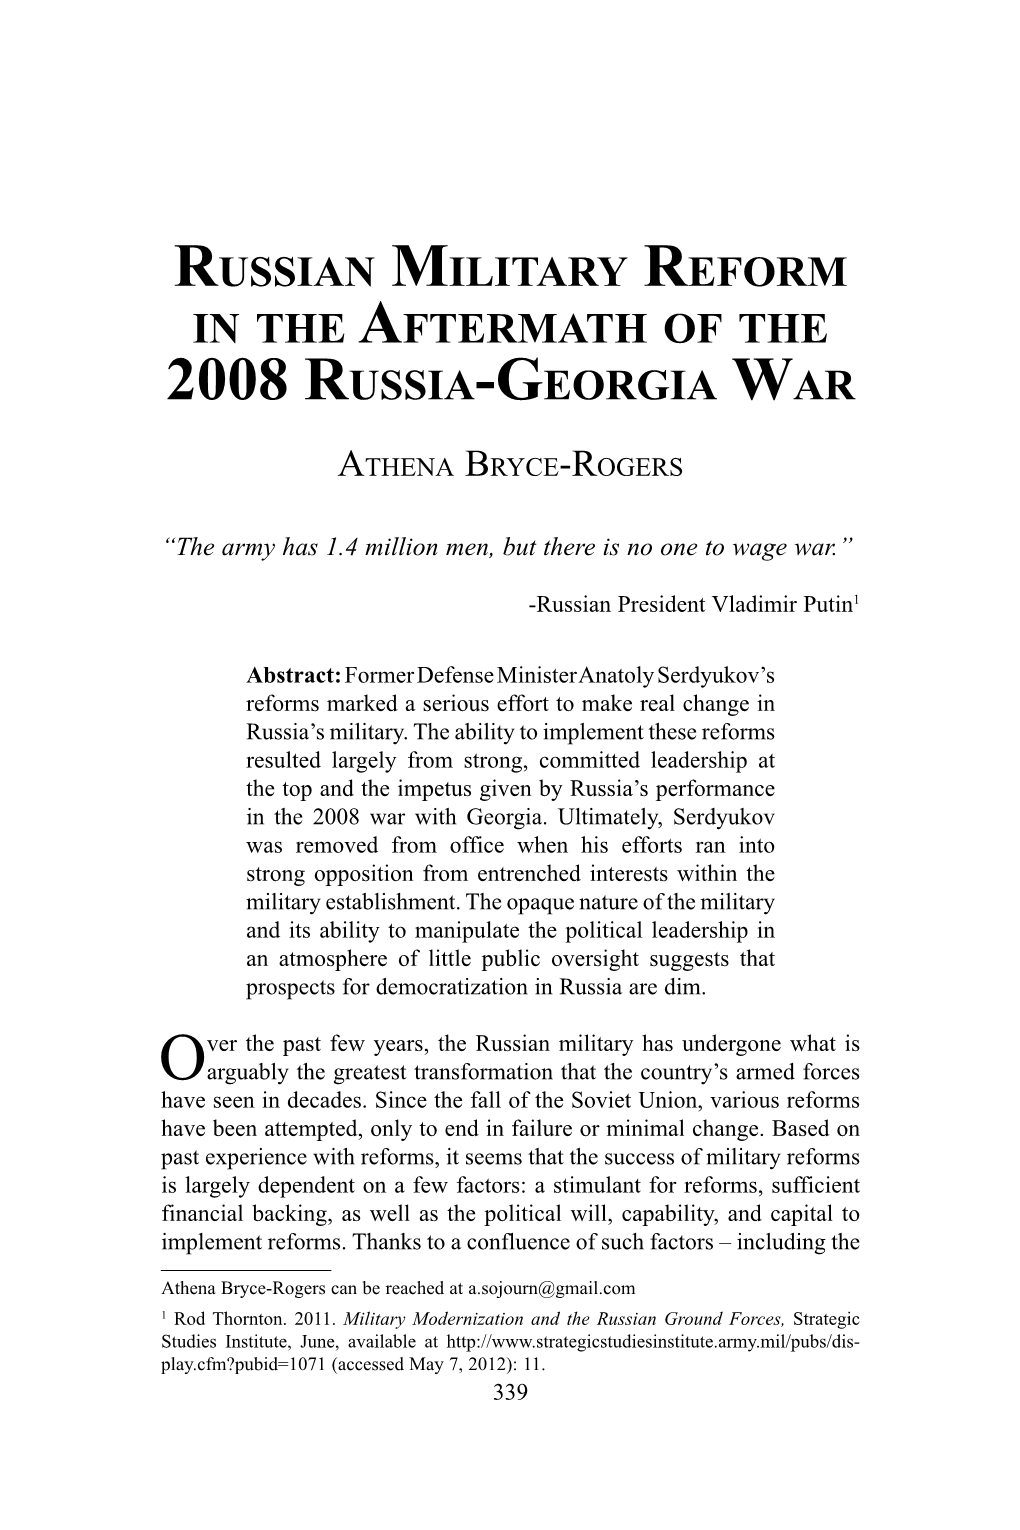 Russian Military Reform in the Aftermath of the 2008 Russia-Georgia War